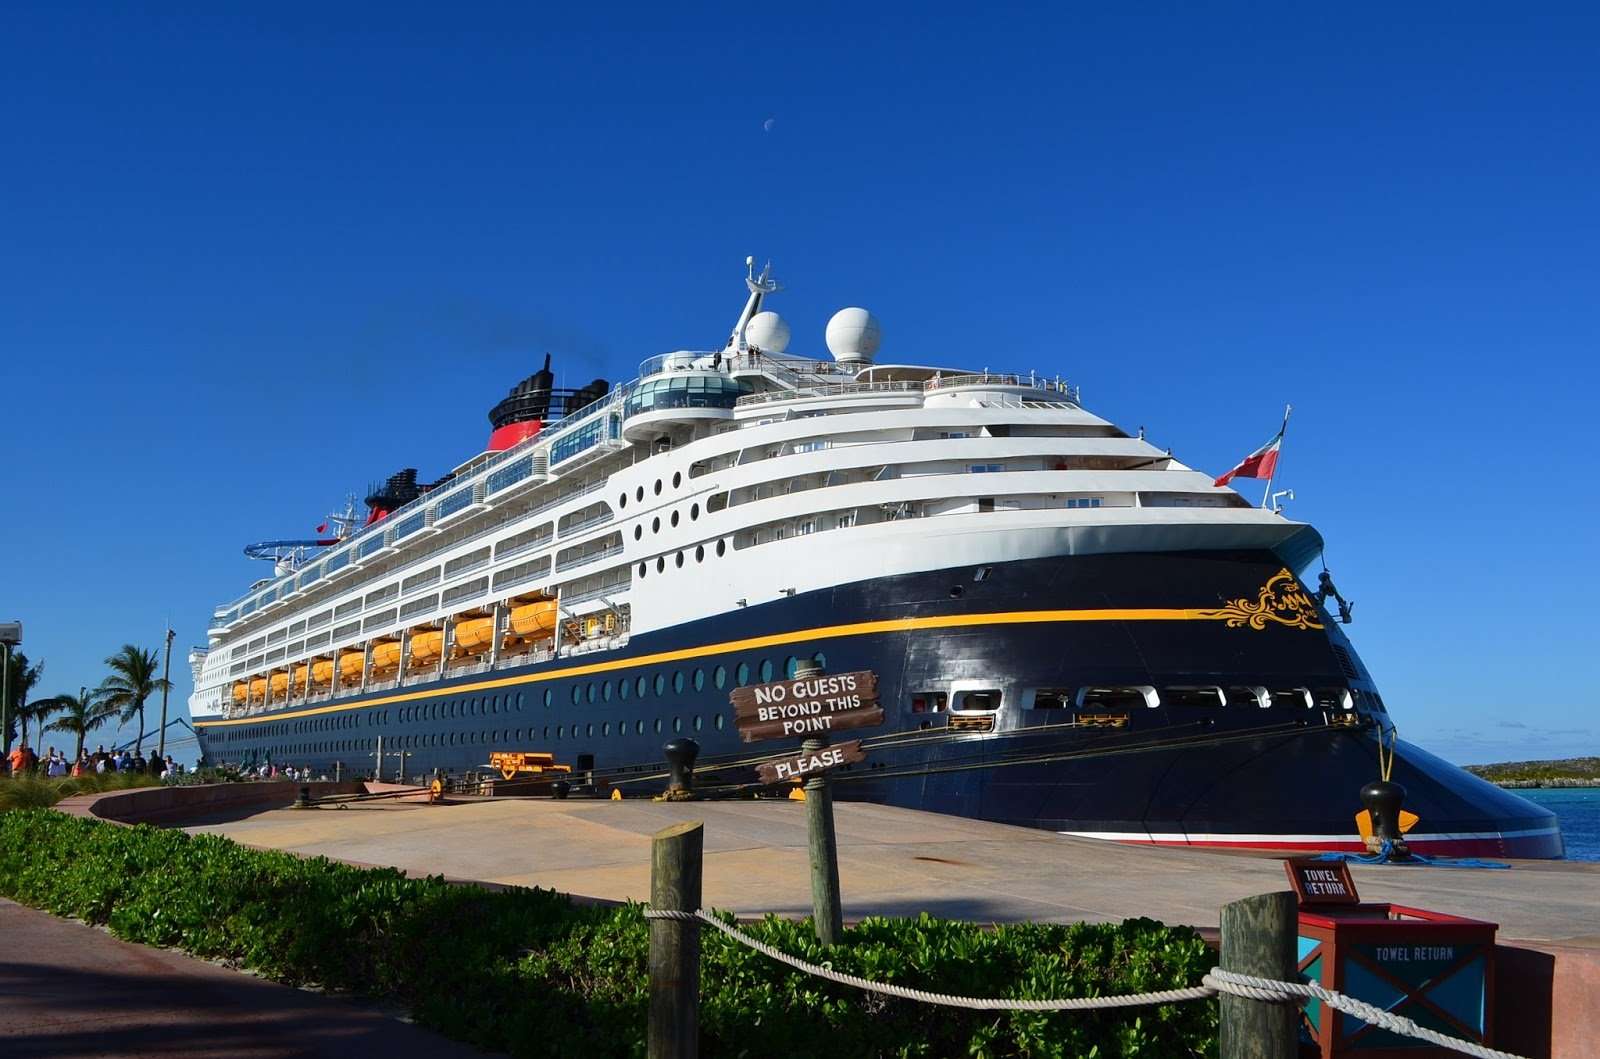 Top 10 Reasons to go on a Disney Cruise